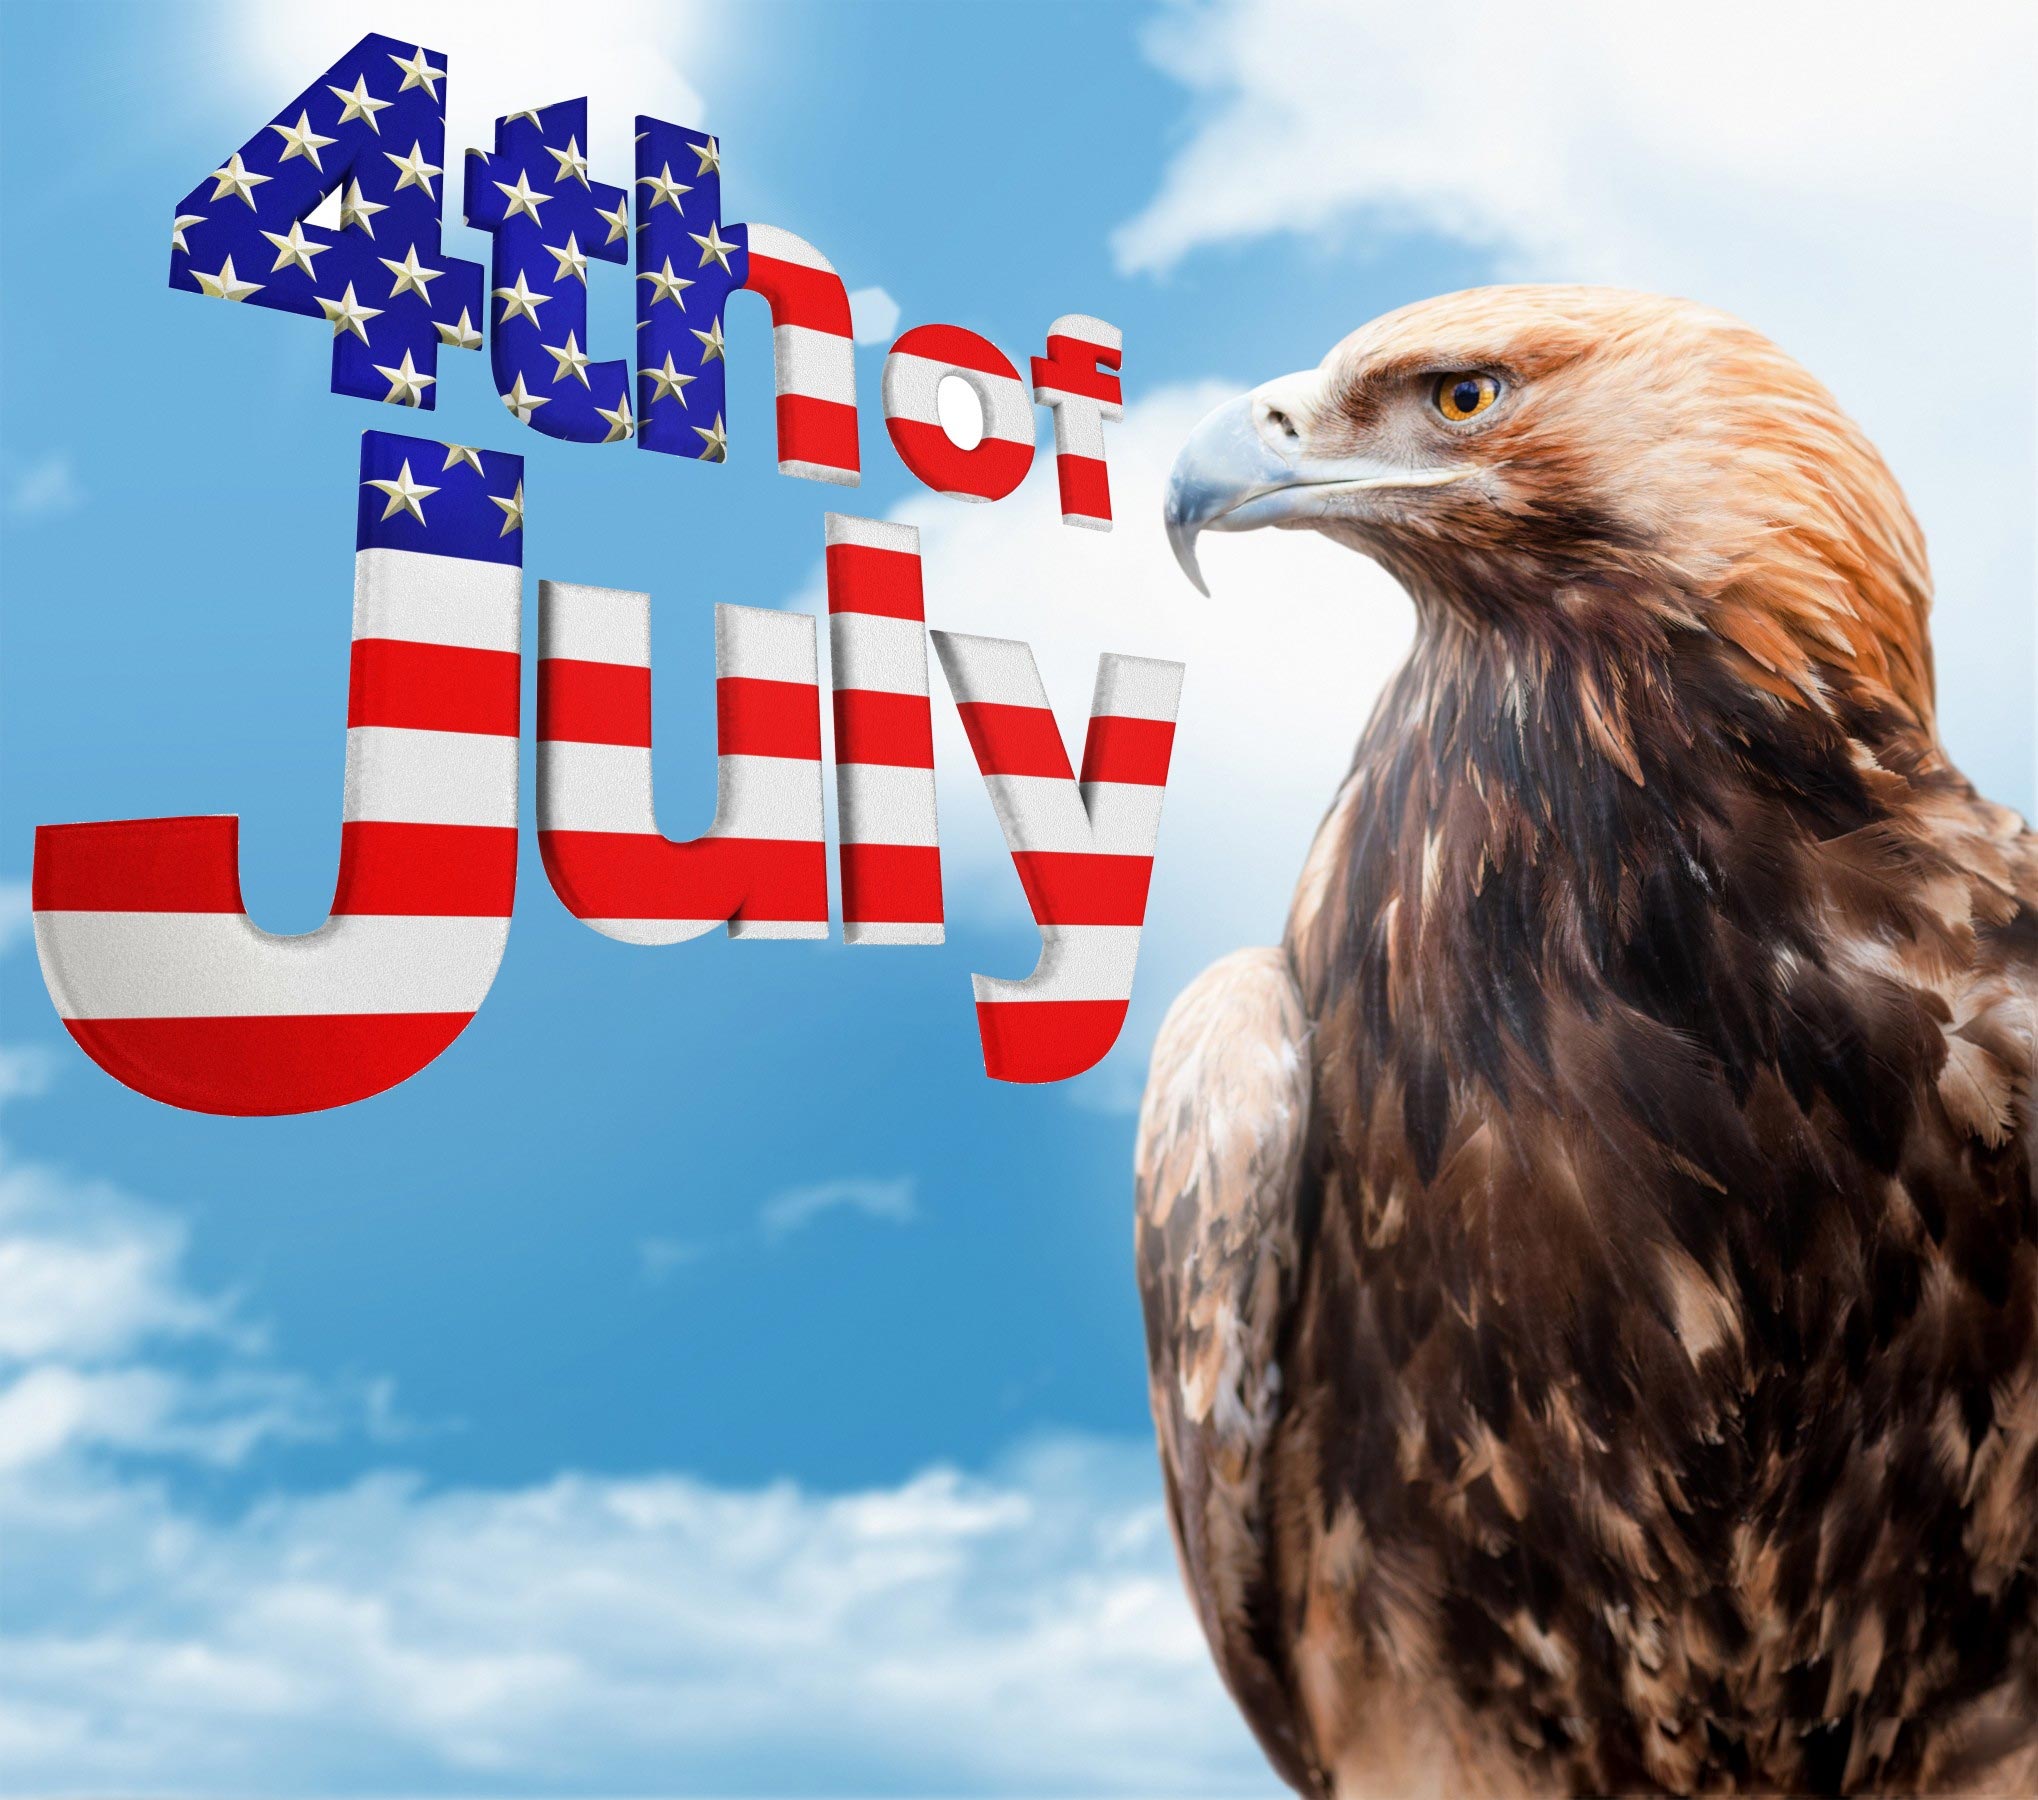 Collection 104+ Images american eagle happy 4th of july eagle Full HD, 2k, 4k